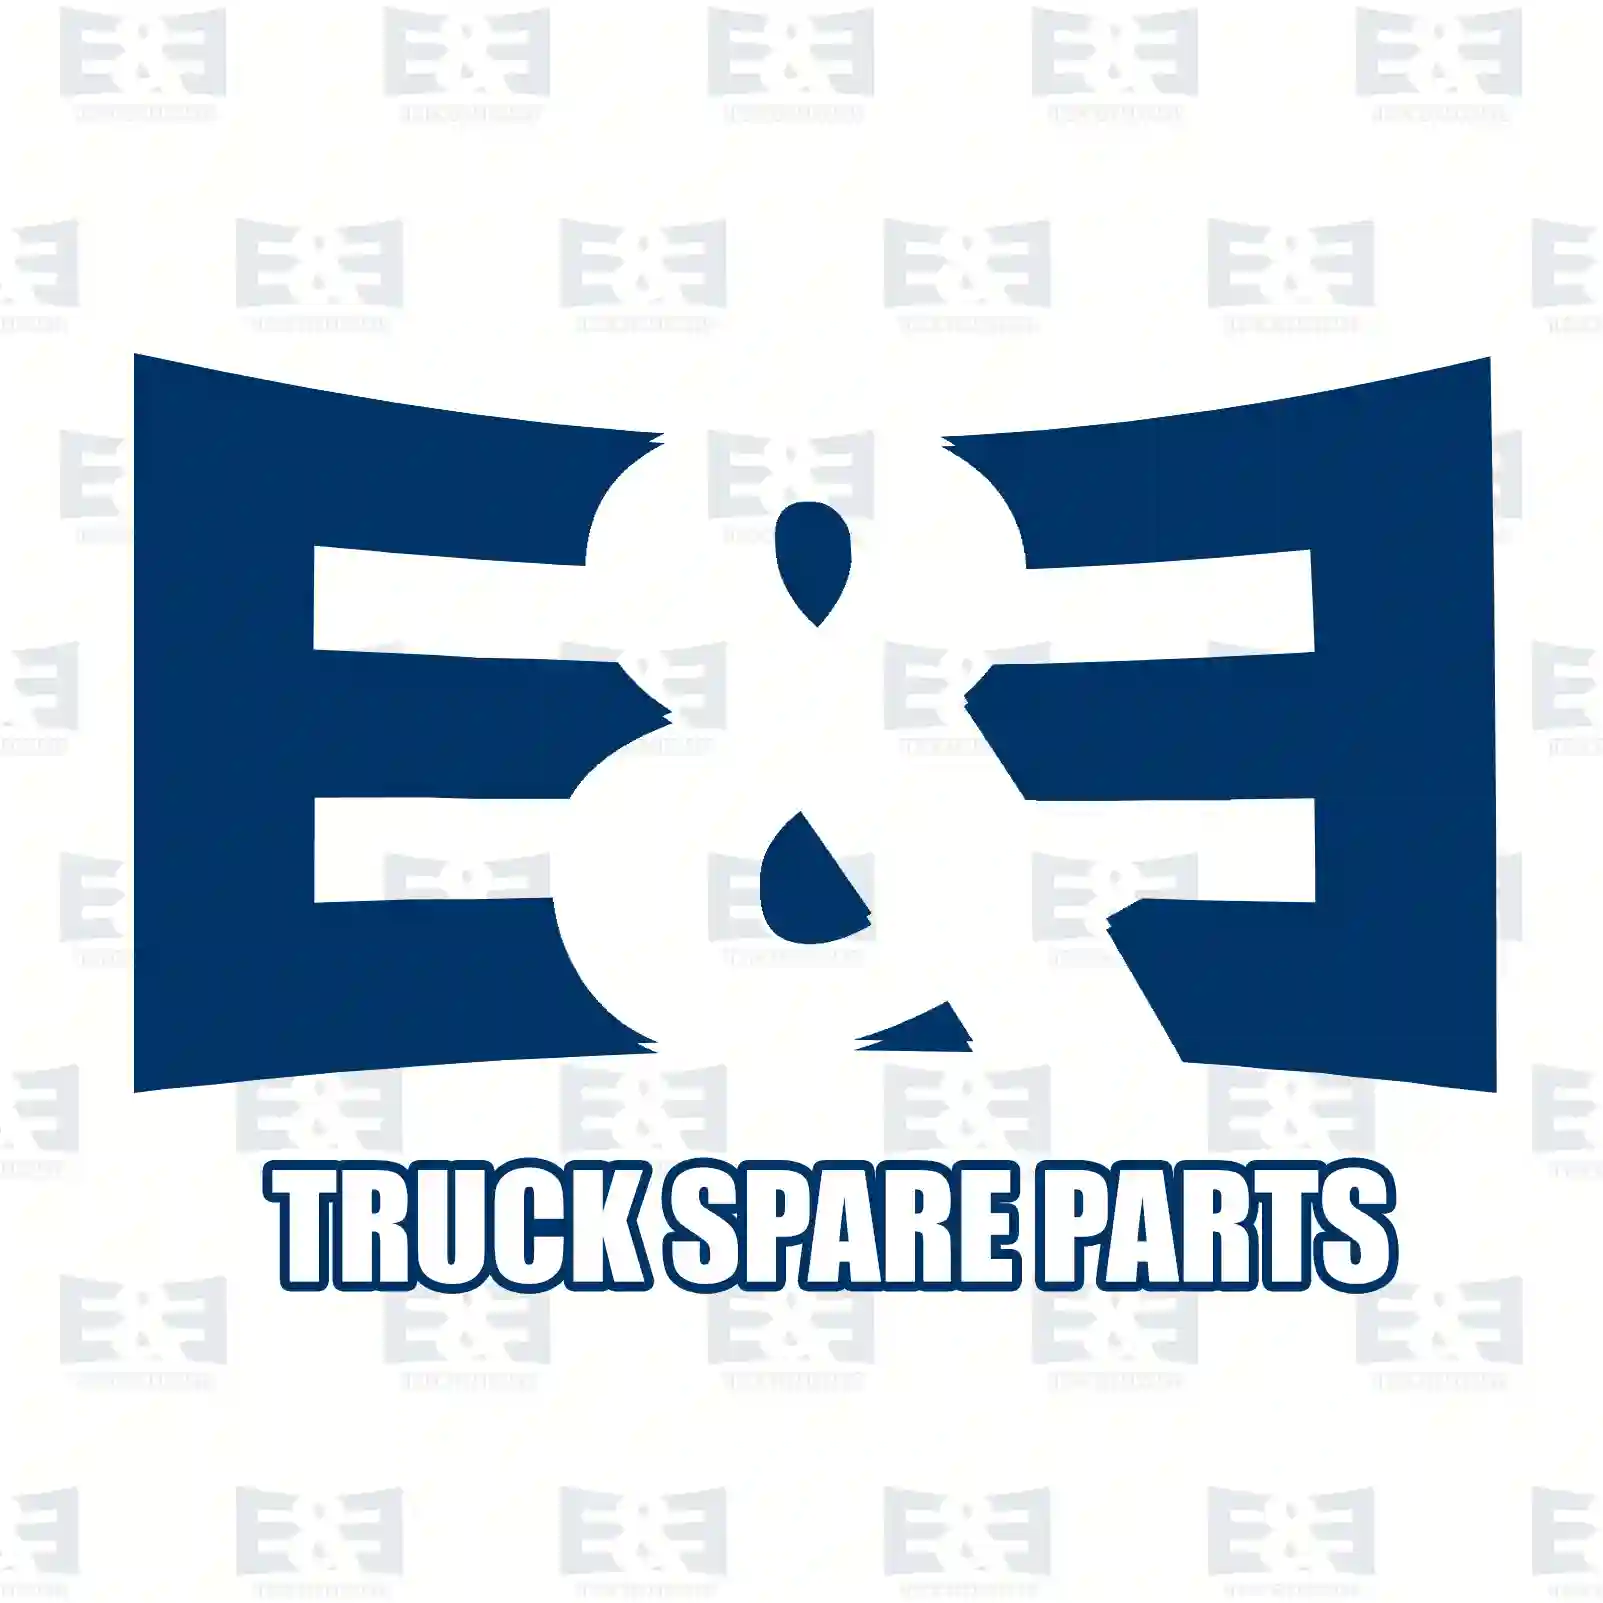  Disc brake pad kit, with accessory kit, with wear indicators || E&E Truck Spare Parts | Truck Spare Parts, Auotomotive Spare Parts